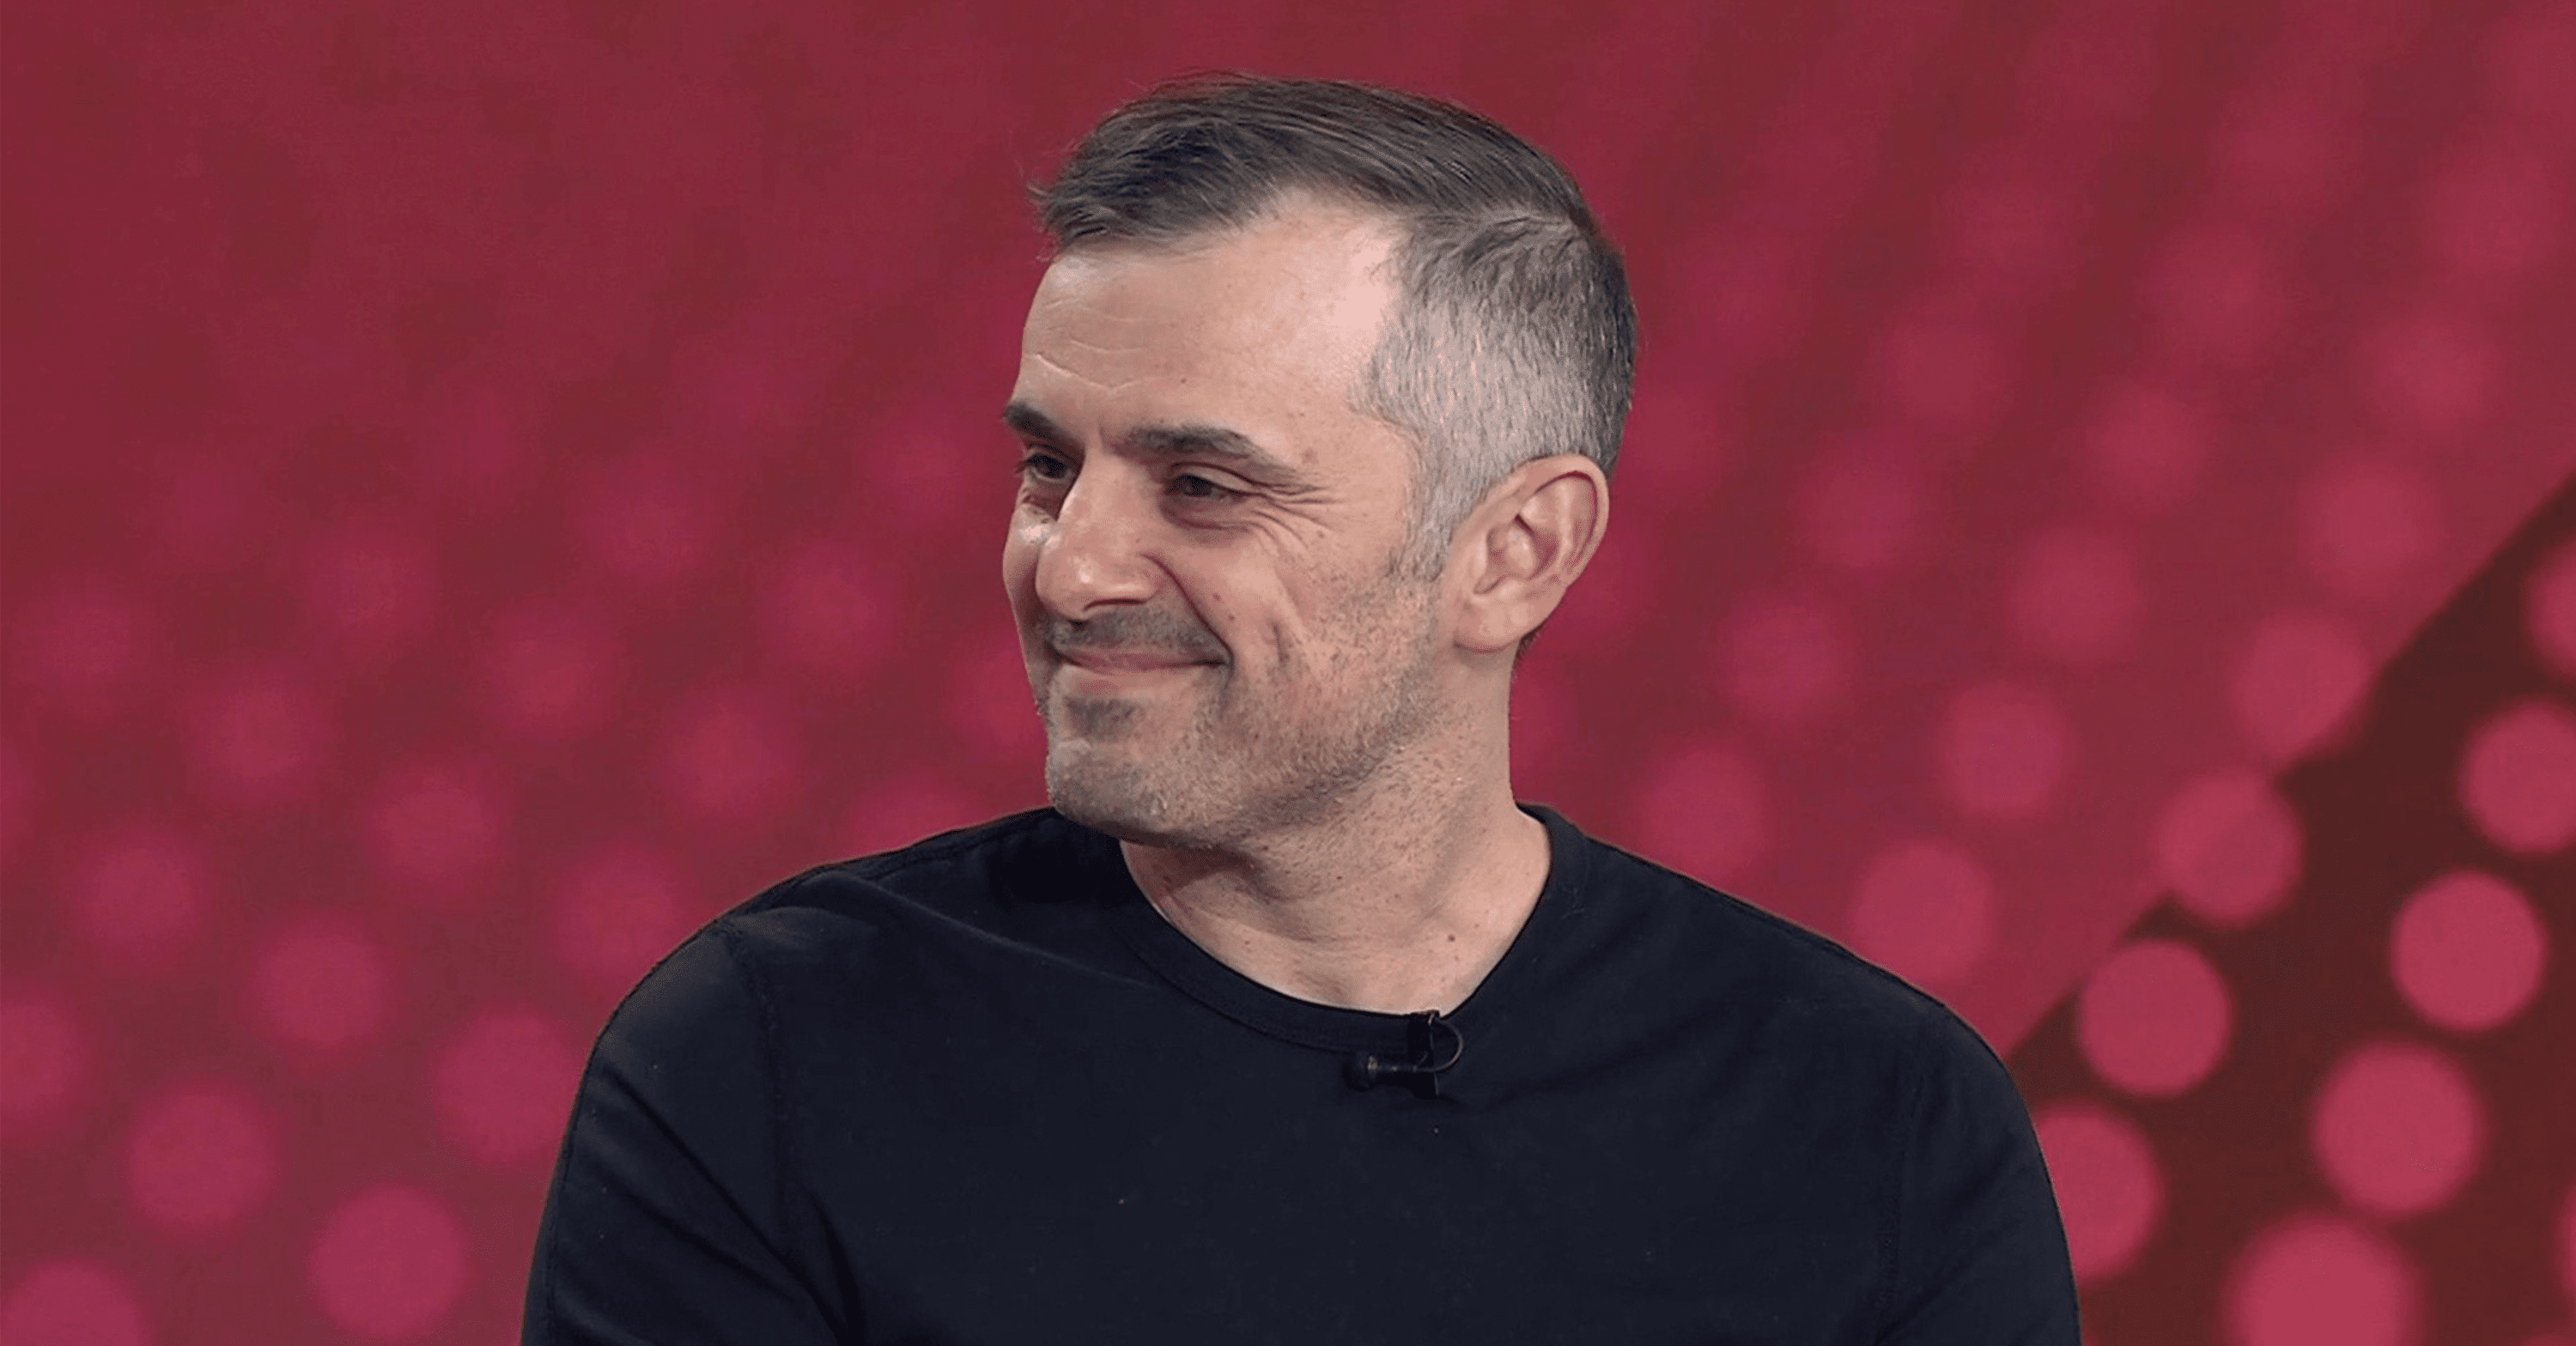 GaryVee explains why empathy and kindness help you go further in your career